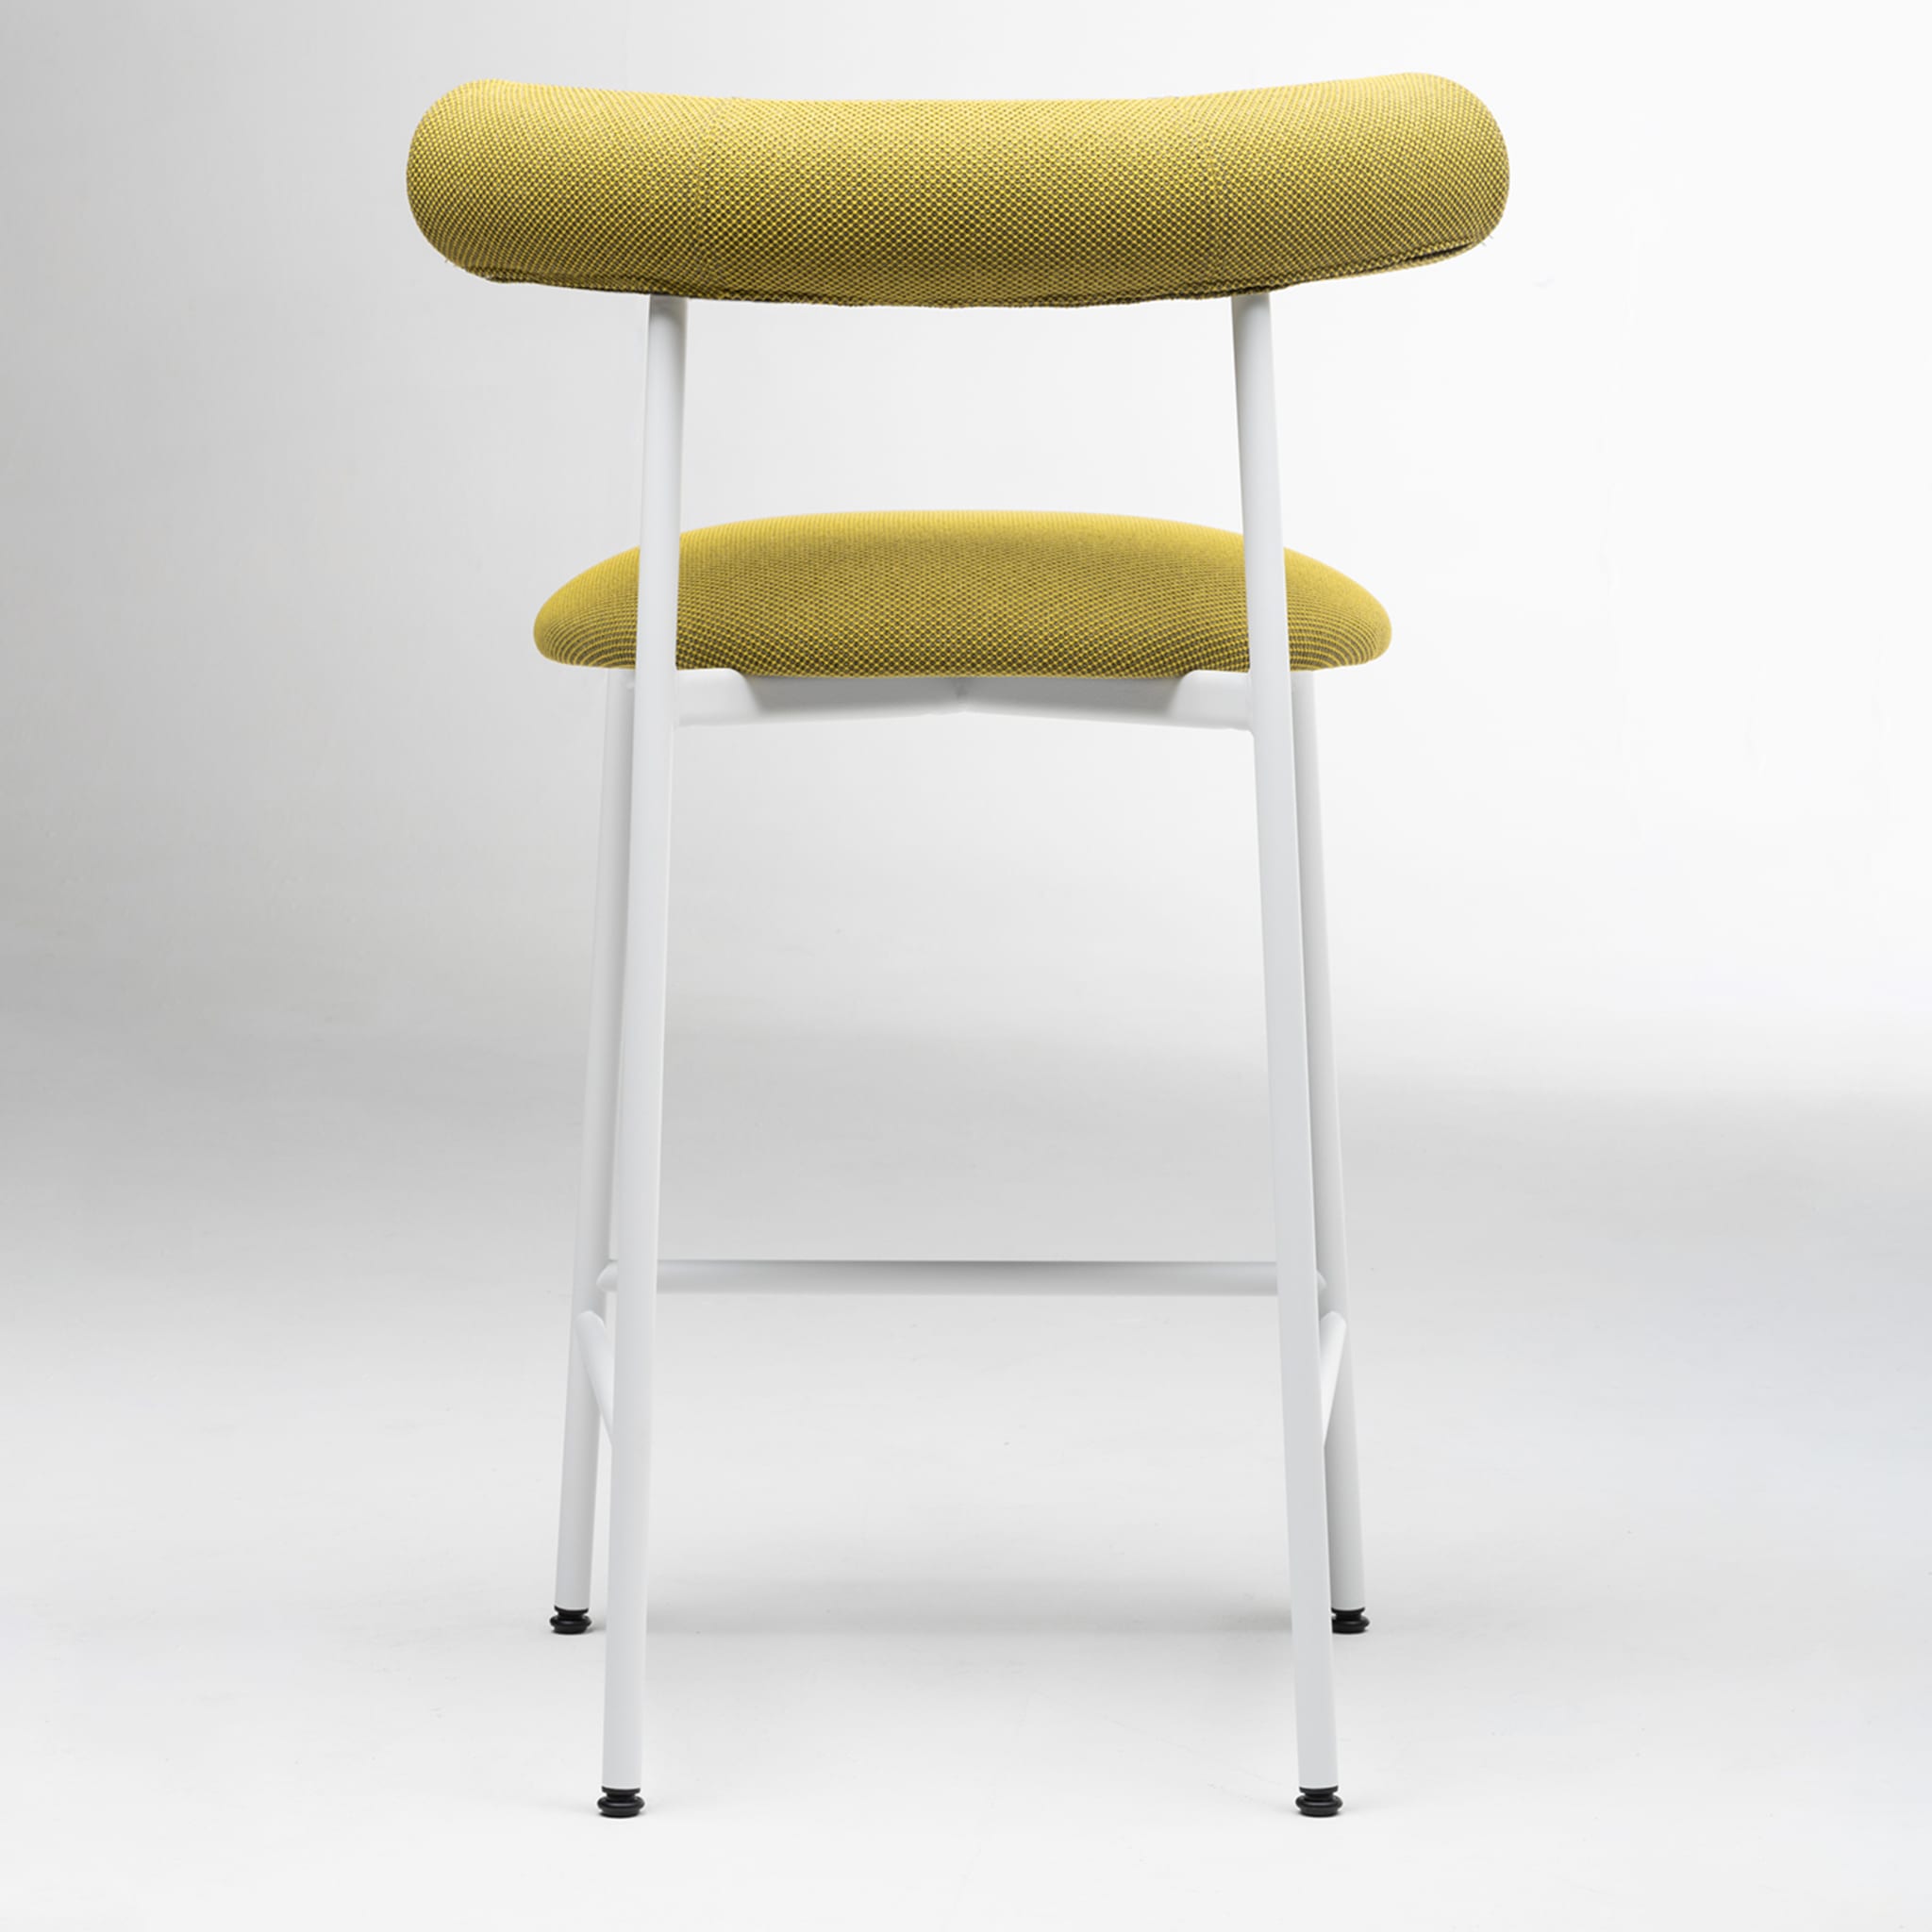 Pampa SG-65 Low Lime-Green & White Stool by Studio Pastina - Alternative view 2